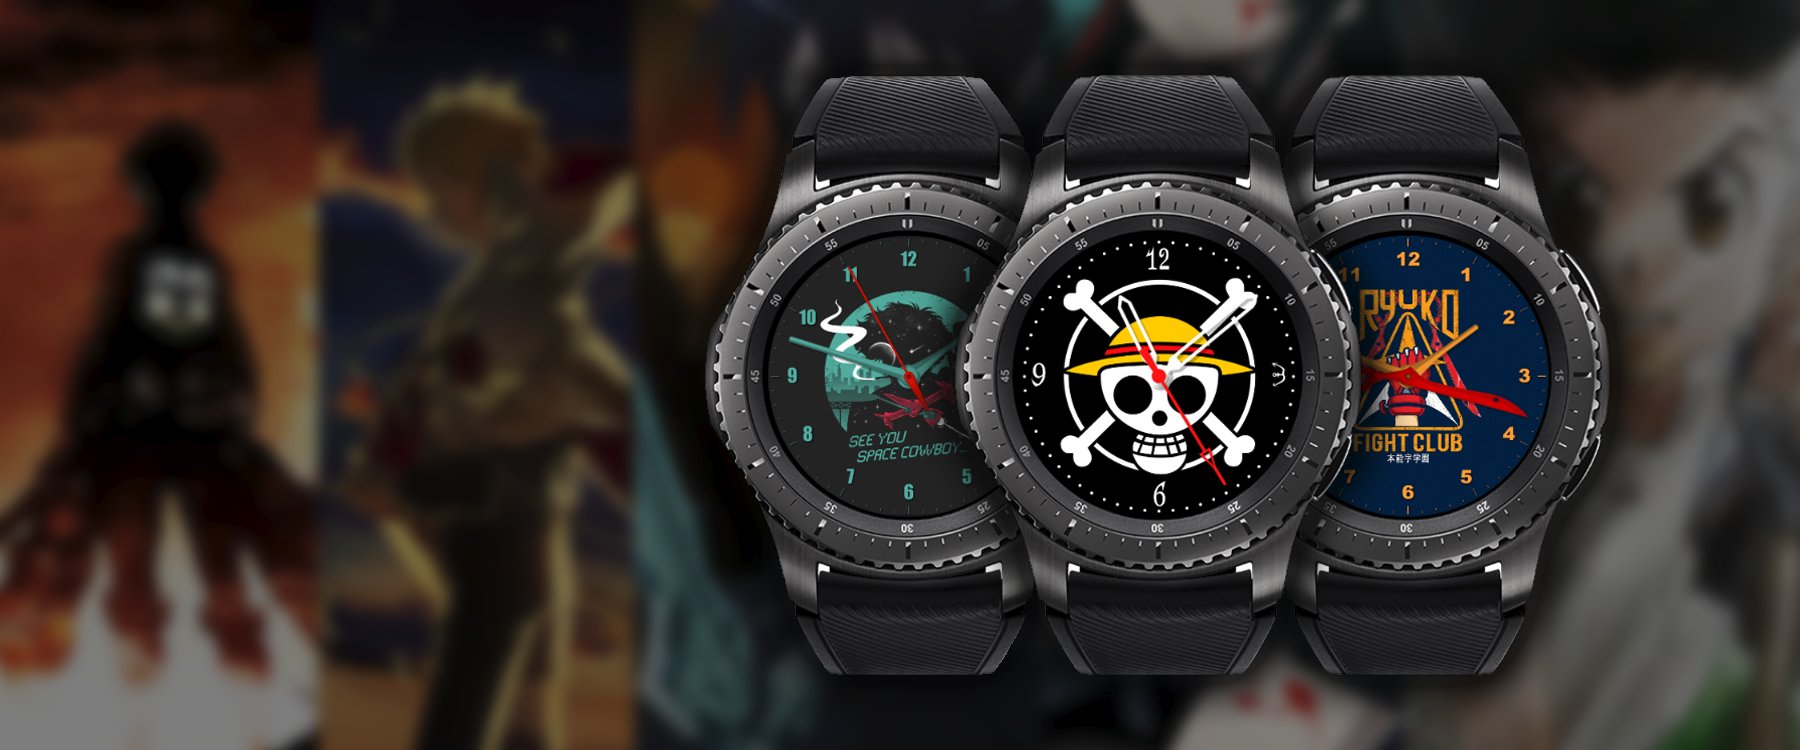 Black Hole Watch Face by TM UI on Dribbble